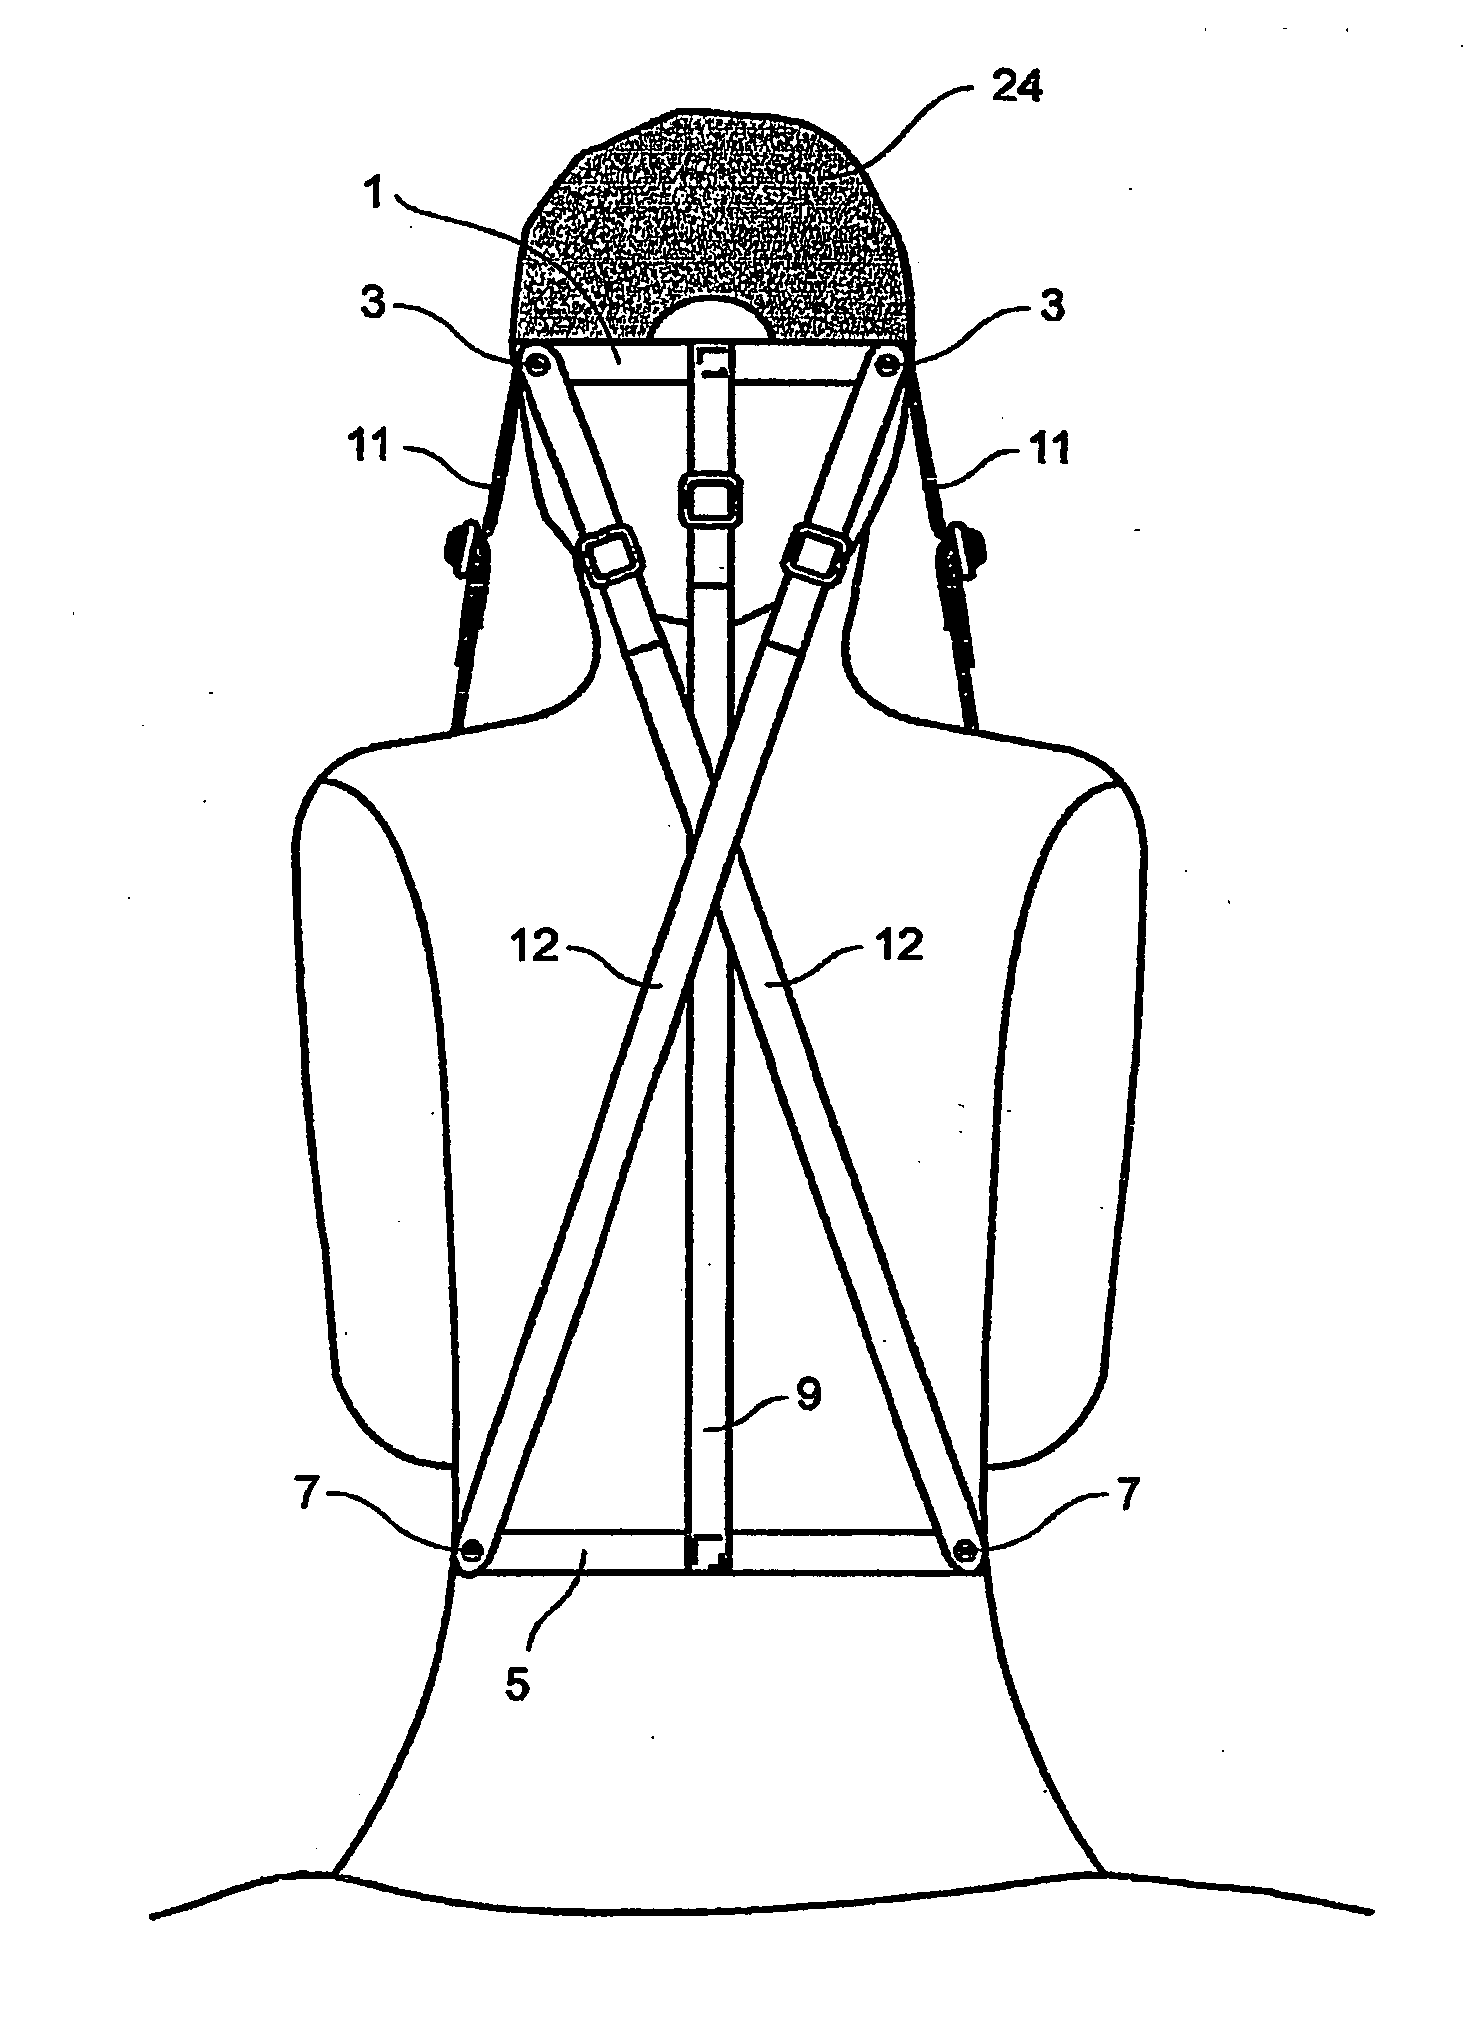 Corset to relieve the cervical spine